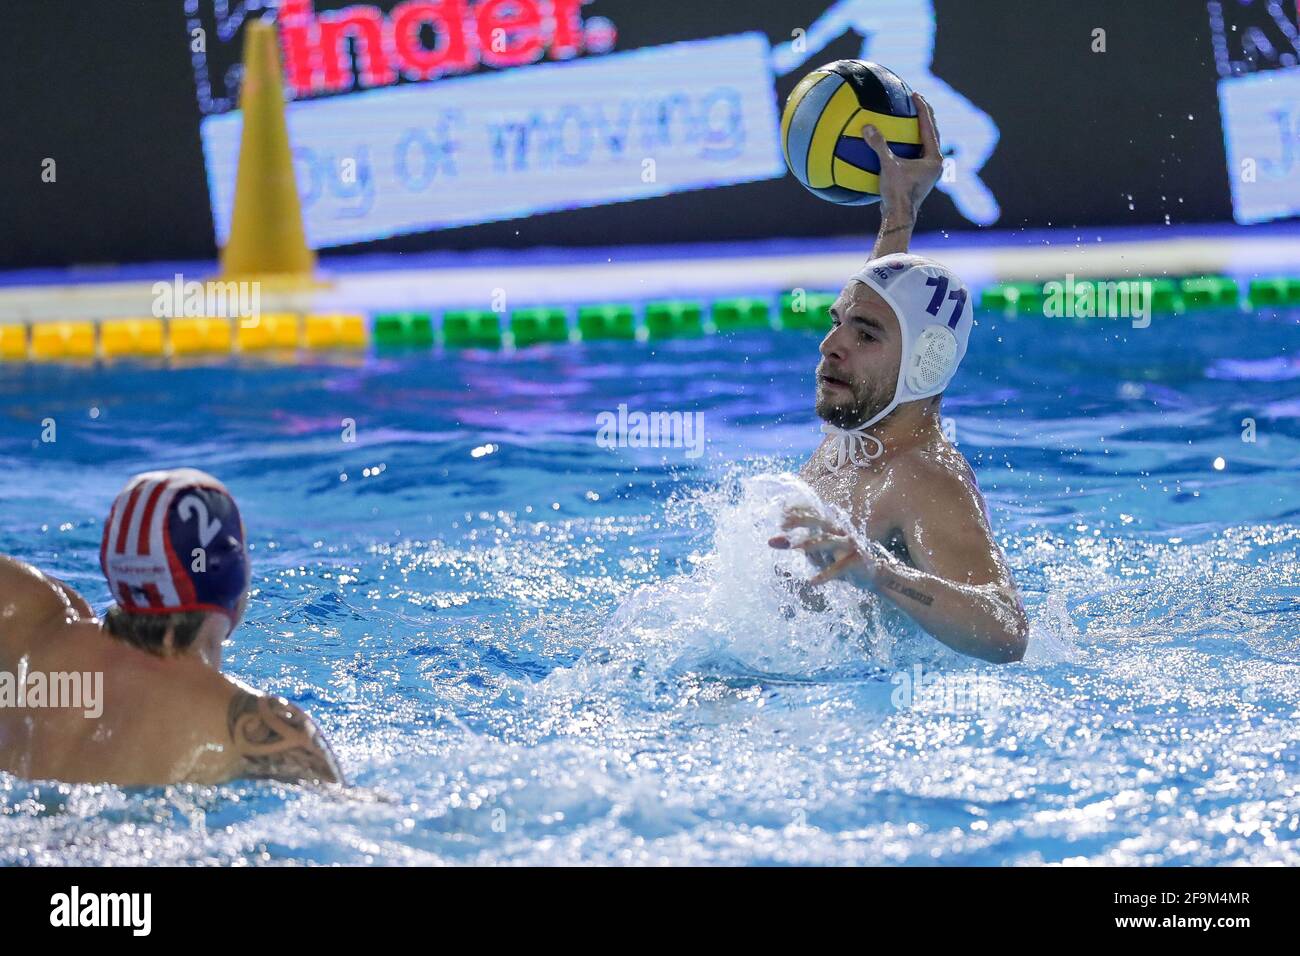 orchestra Deviate Closely Federal Center pool, Rome, Italy, 19 Apr 2021, Hrvoje Benic (Jug Adriatic)  during Jug Adriatic vs Olympiacos Piraeus, LEN Cup - Champions League  waterpolo match - Photo Luigi Mariani / LM Stock Photo - Alamy